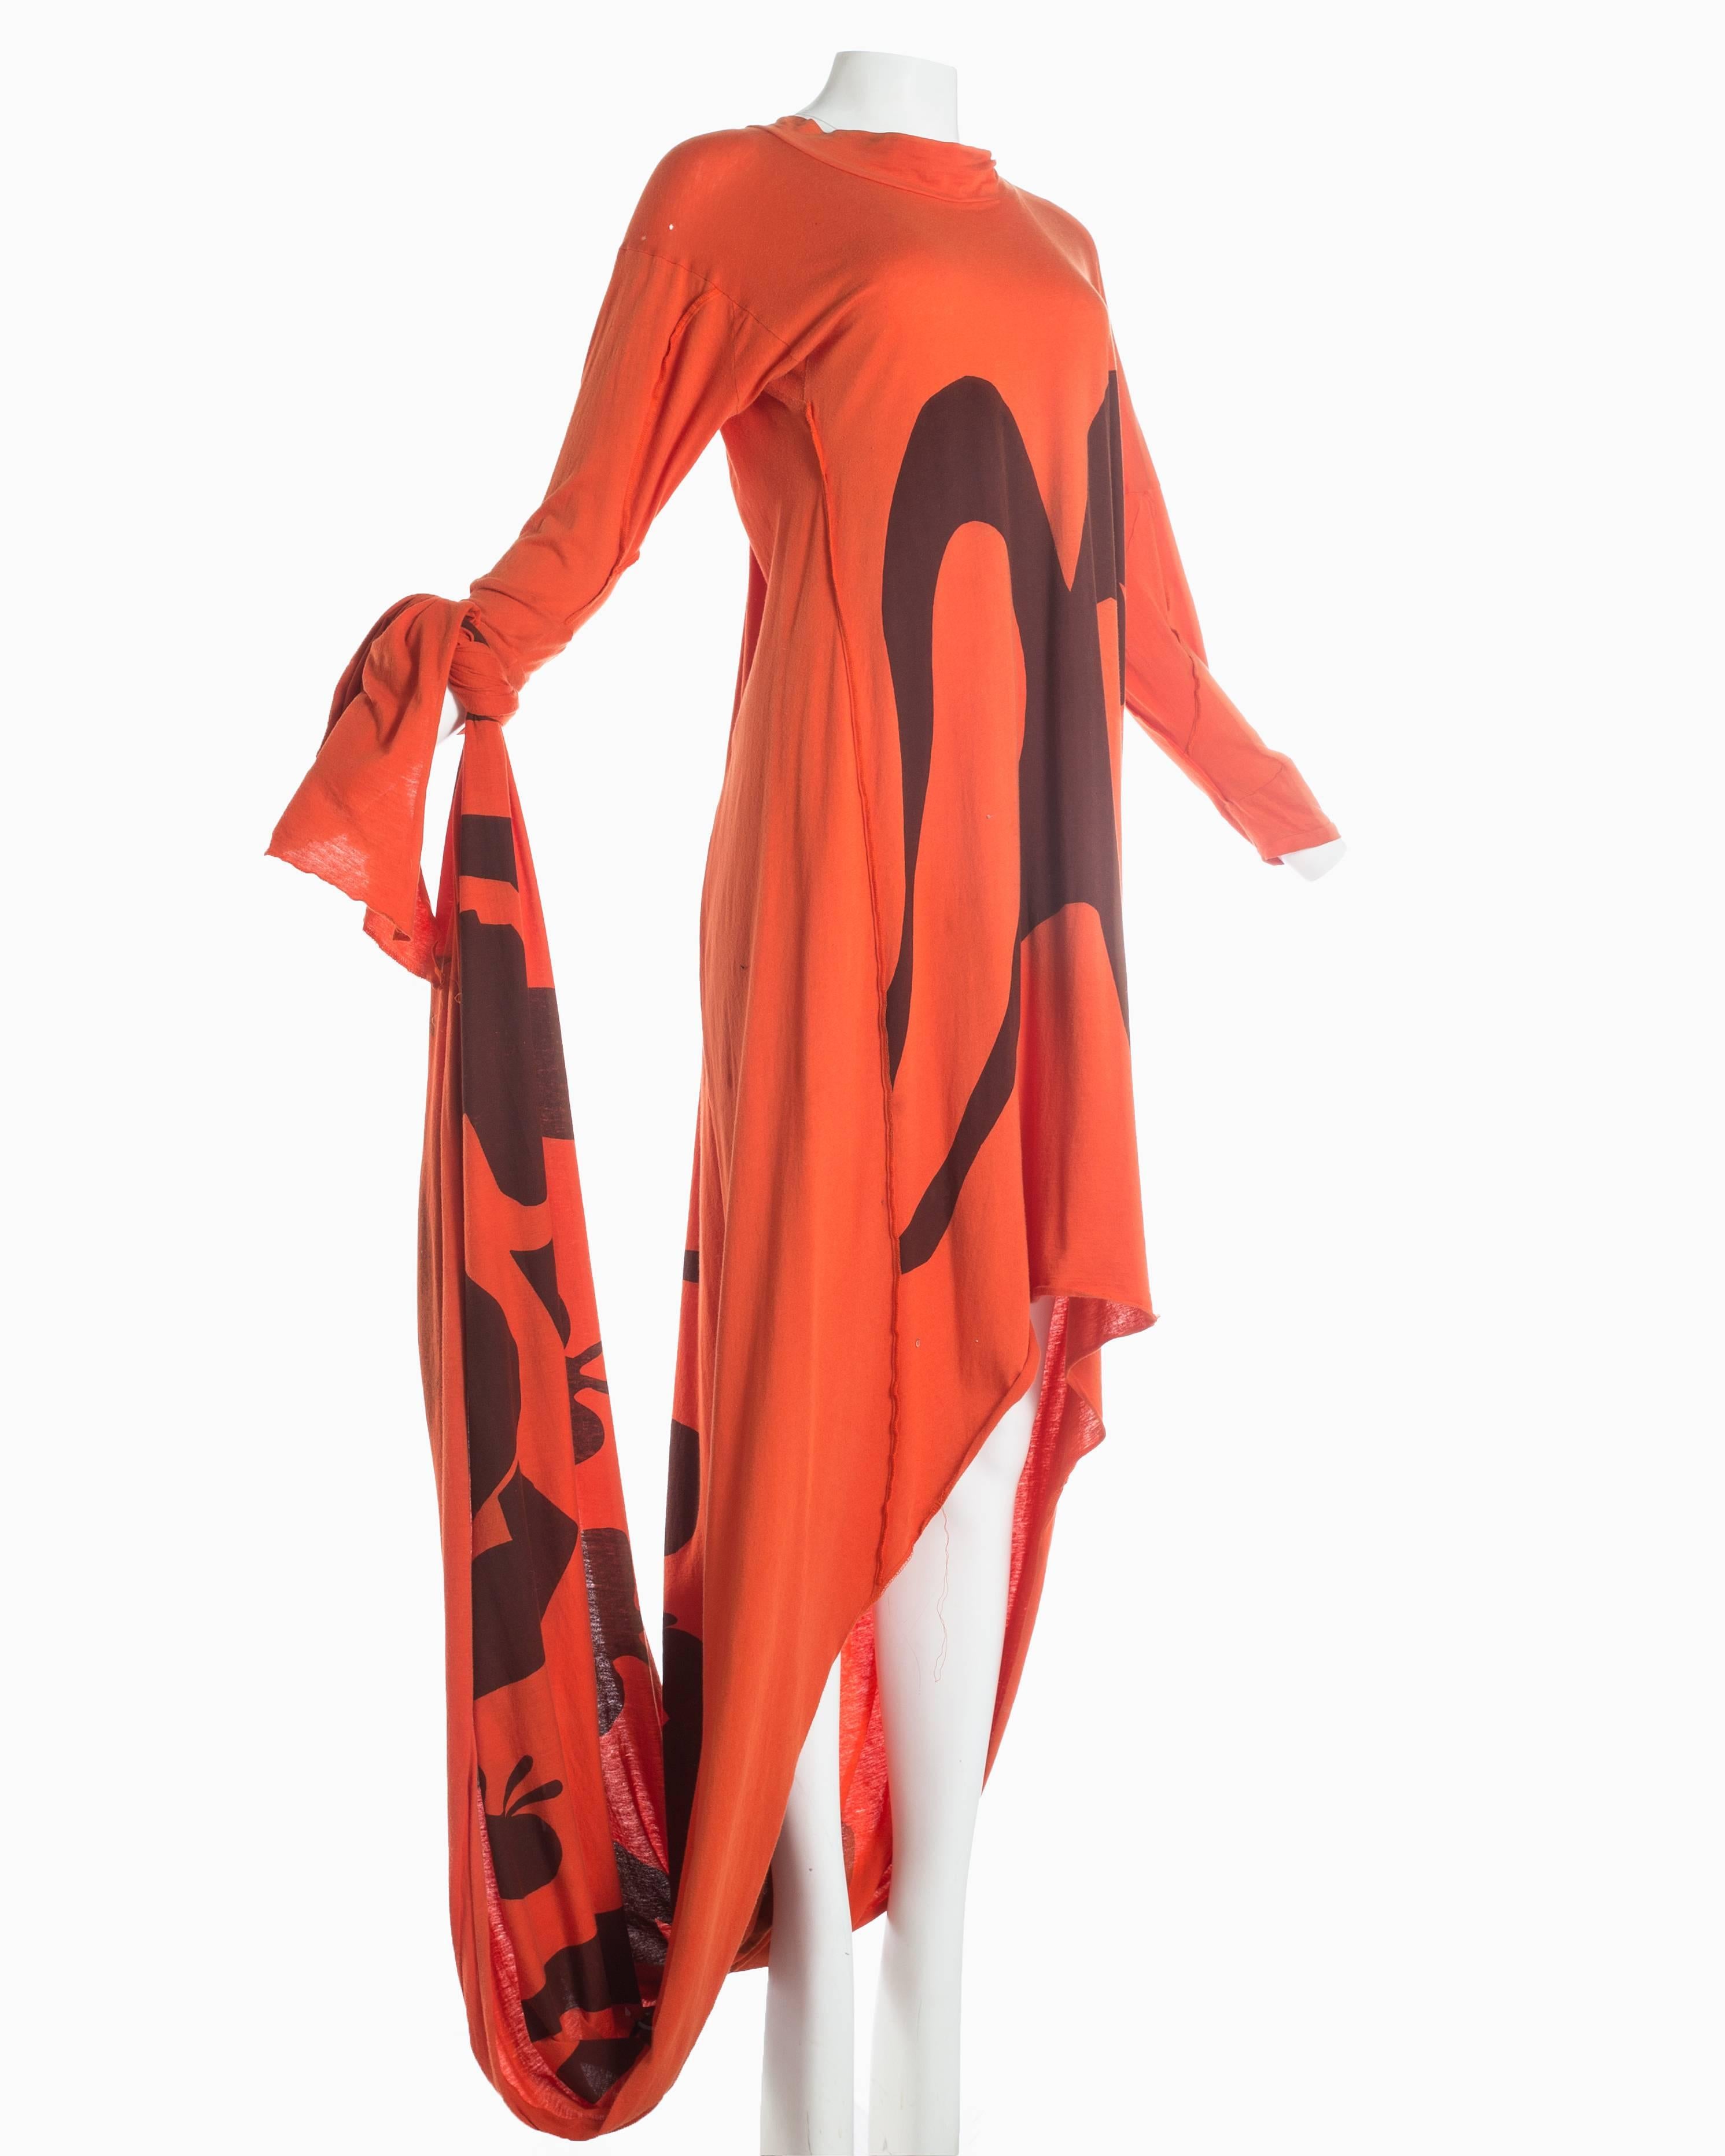 Red Worlds End orange cotton jersey toga dress with Henri Matisse print, A / W 1982 For Sale